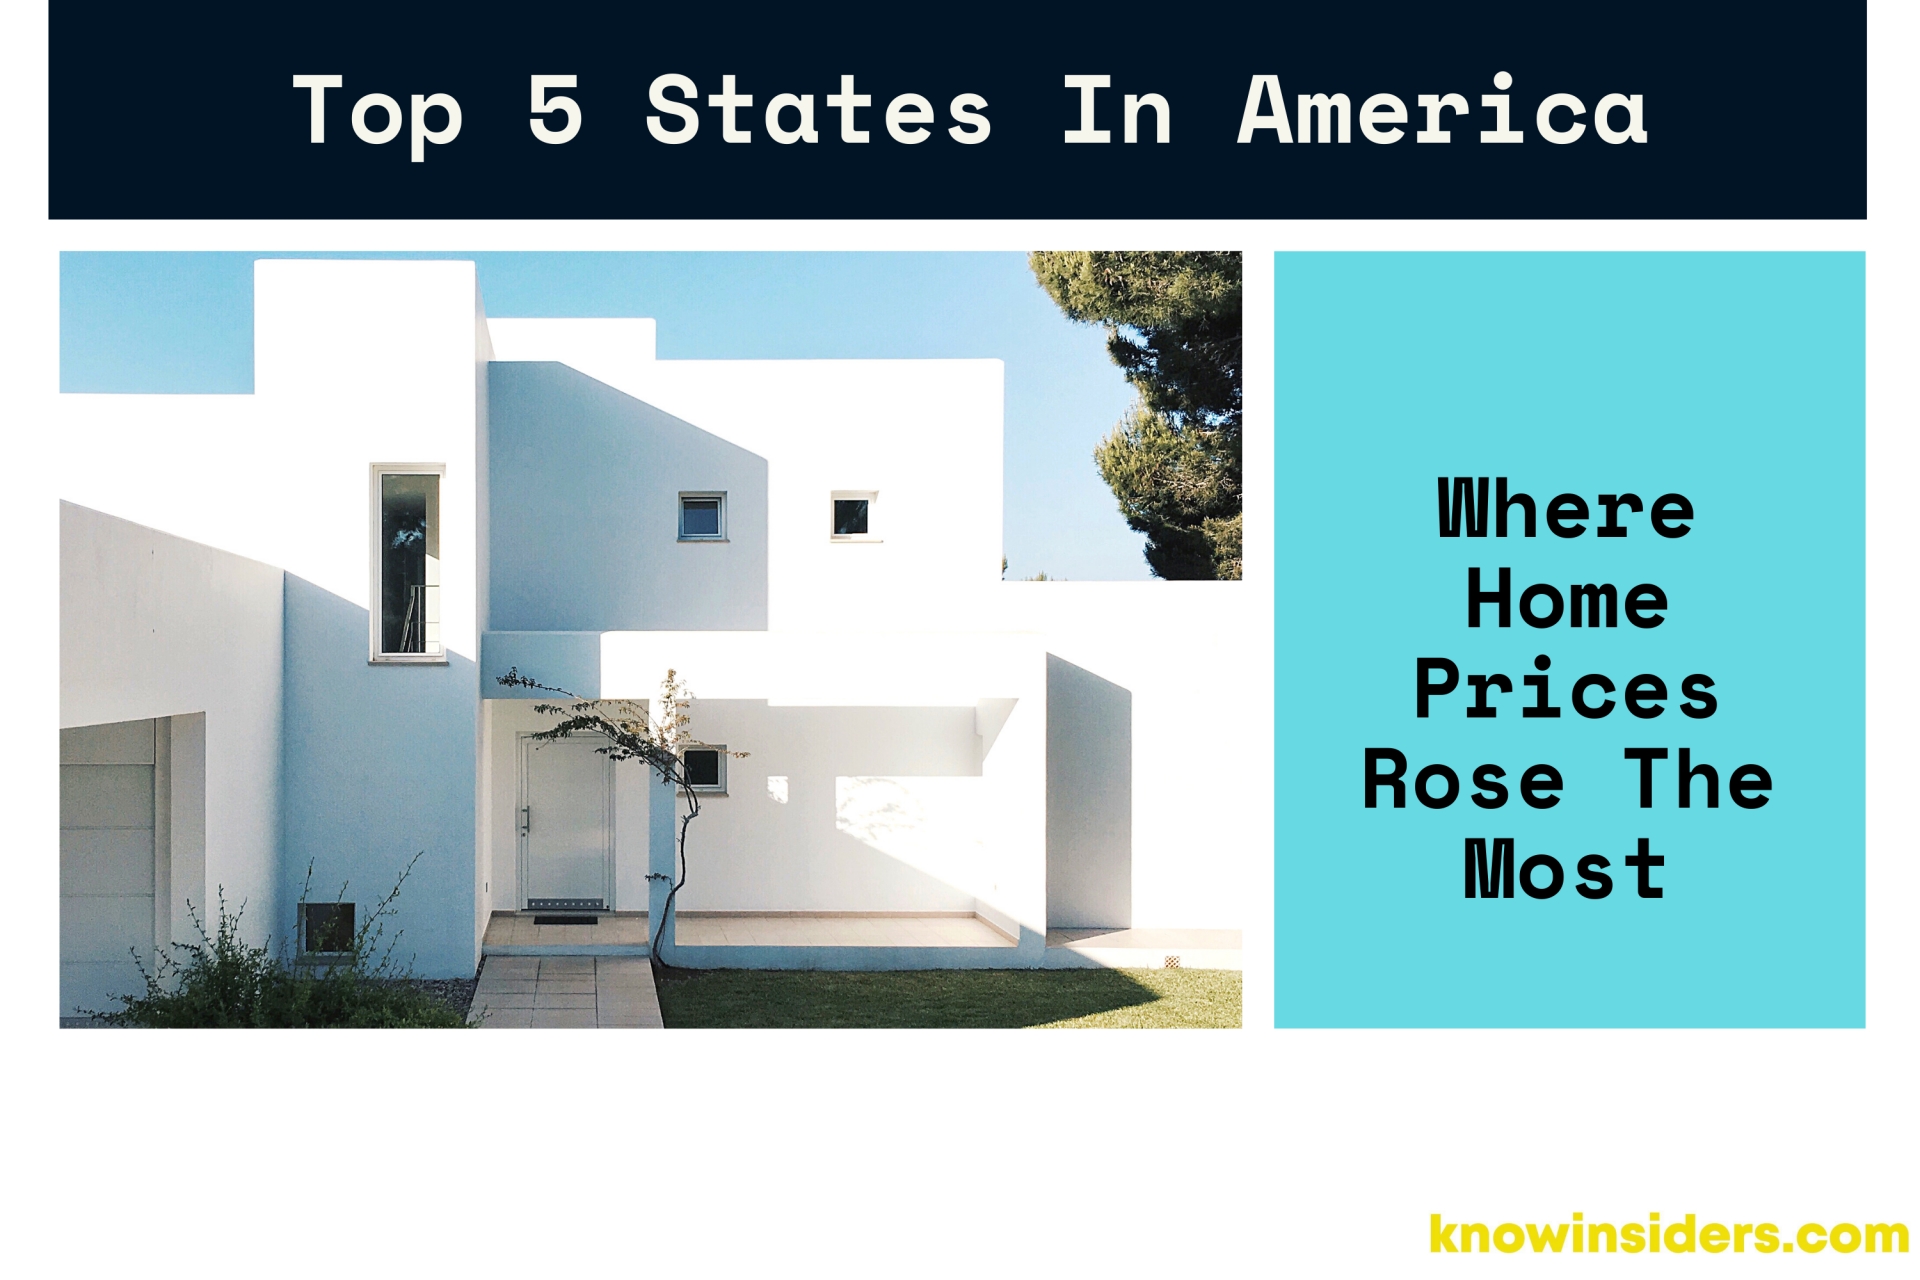 Top 5 States Where Home Prices Rose The Most In The US